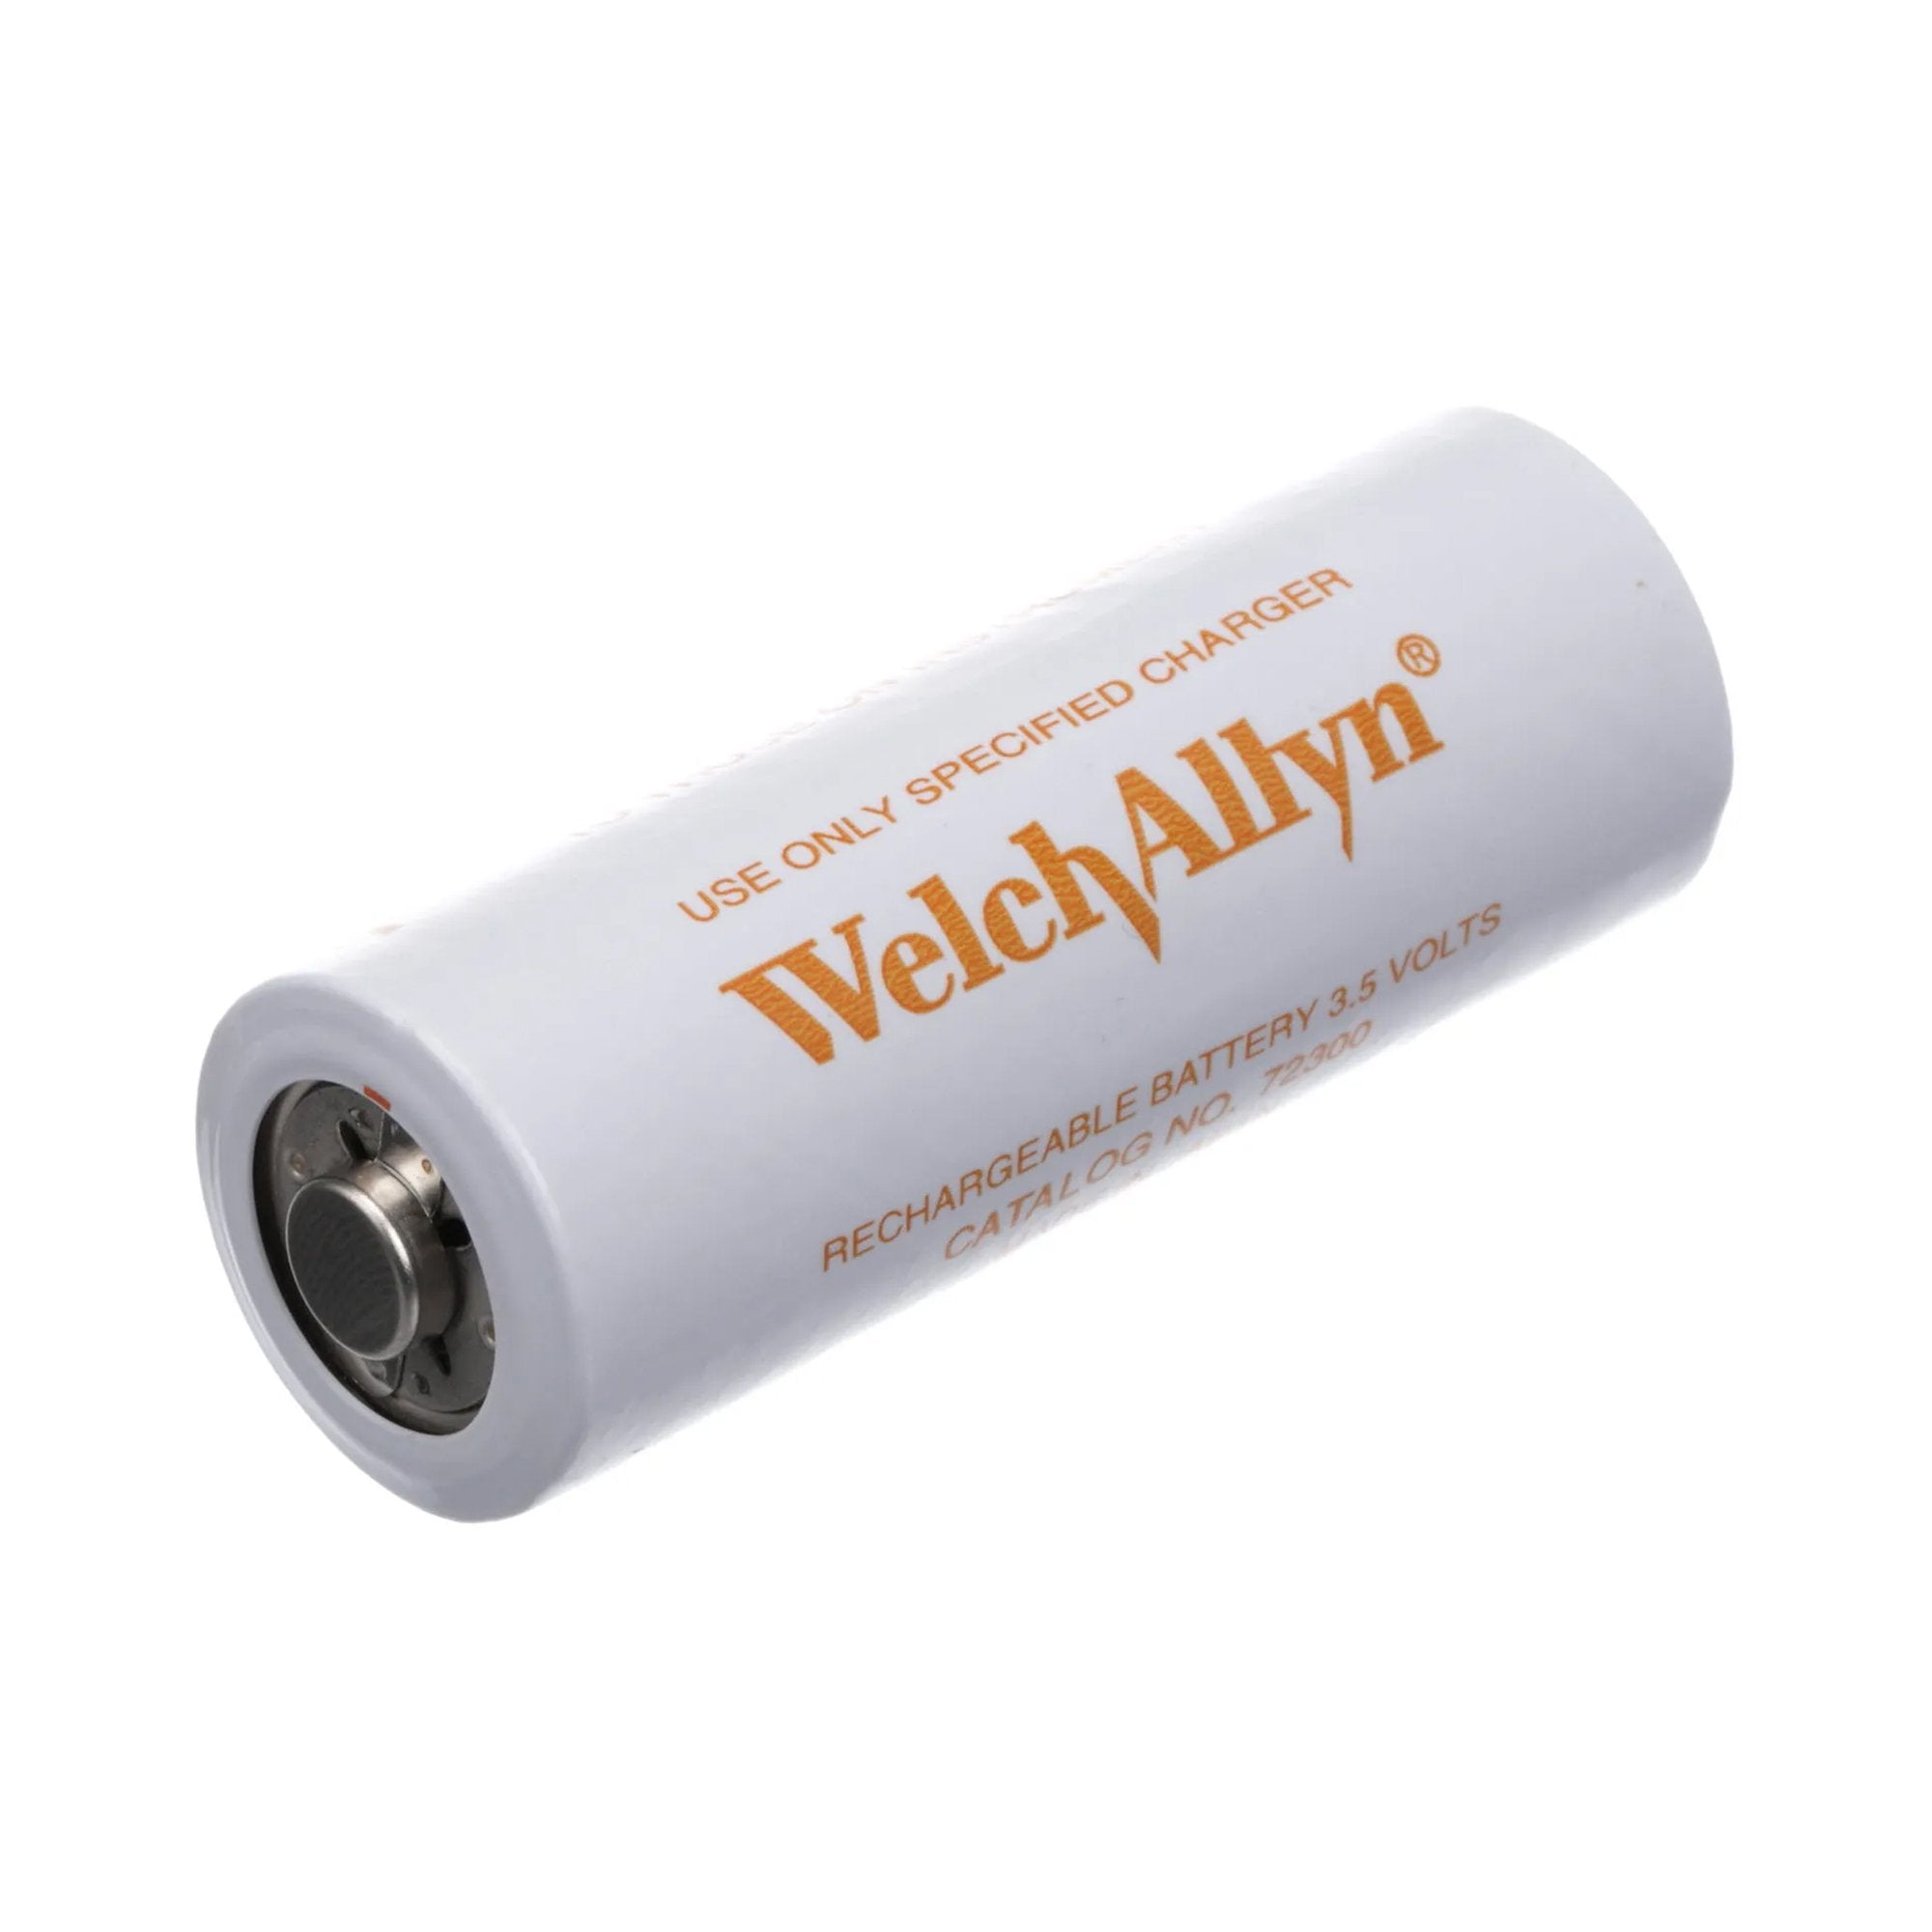 Welch Allyn NiCd Diagnostic Battery 72300 for Scope Handles - 71000A / 71020A / 71020C / 71055C